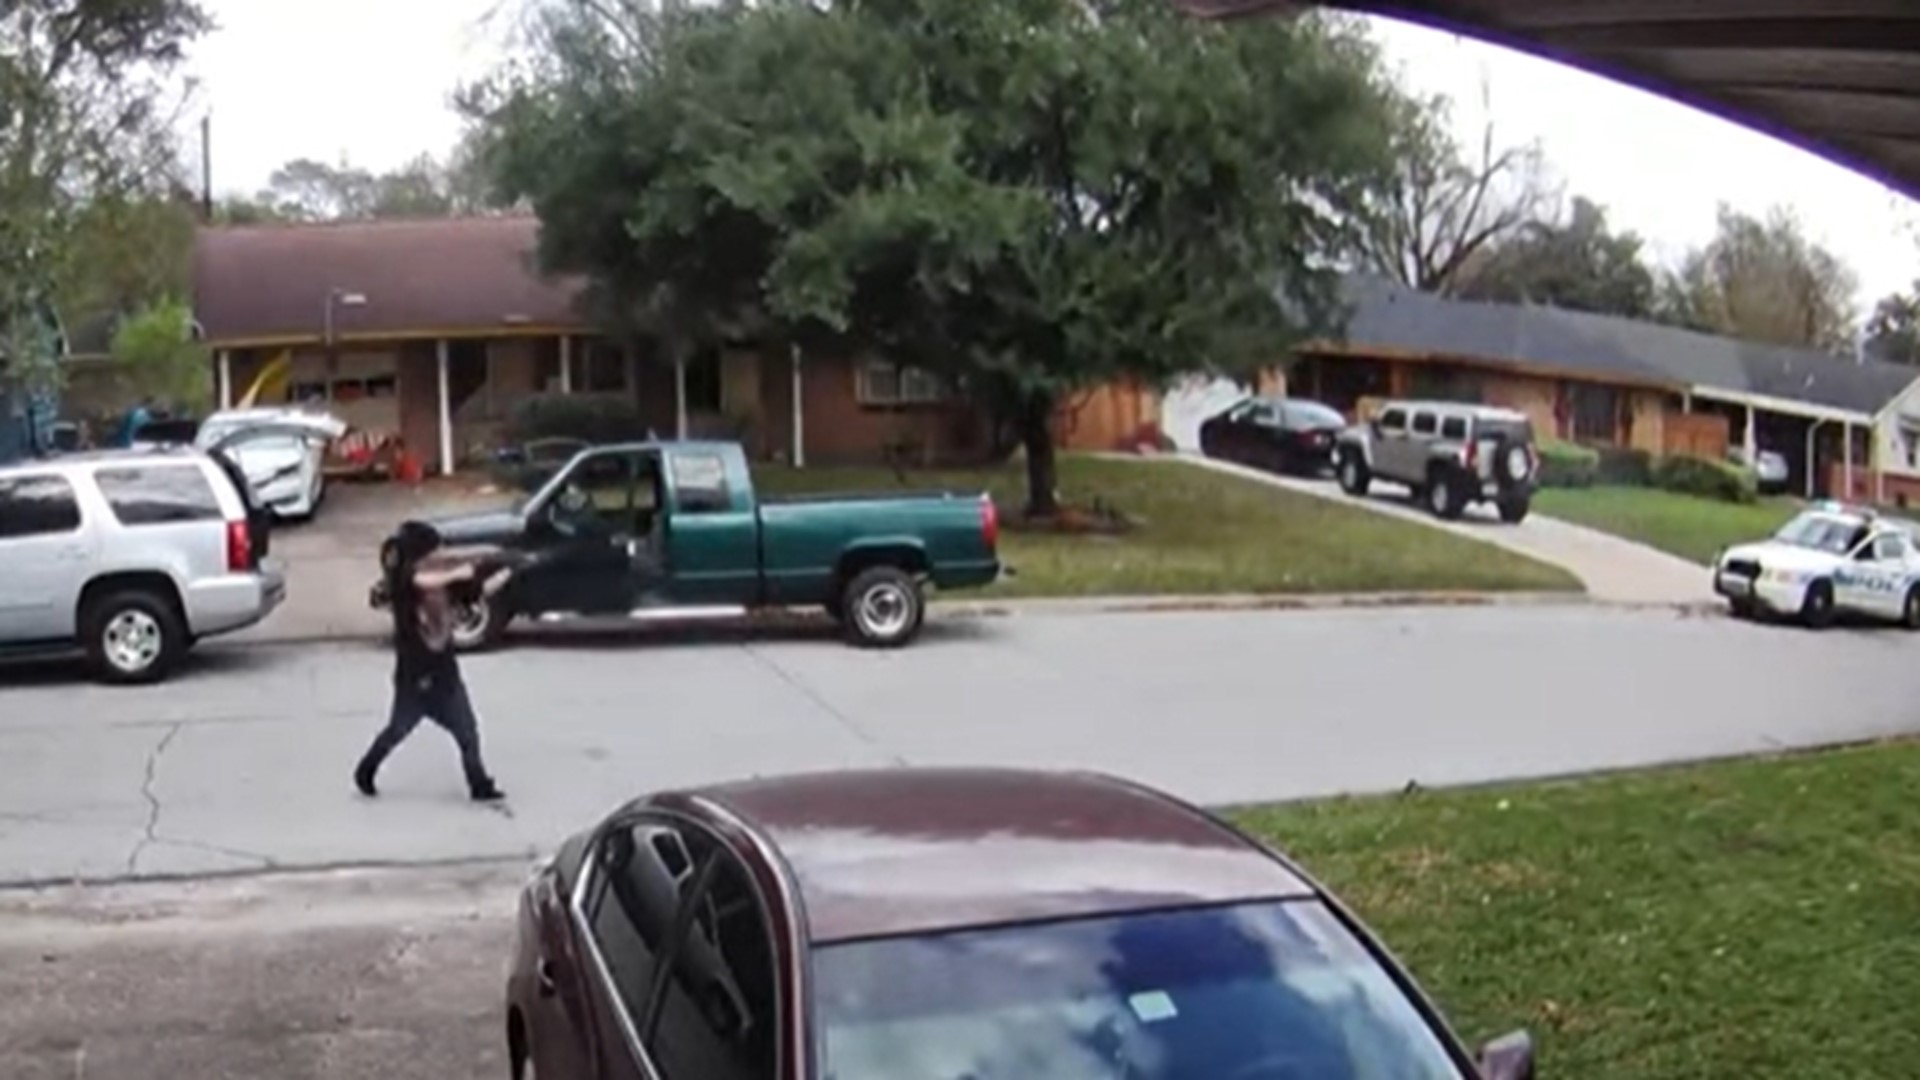 The Houston Police Department released bodycam footage of an officer-involved shooting that happened in Dec. 2021 on Valencia Drive.